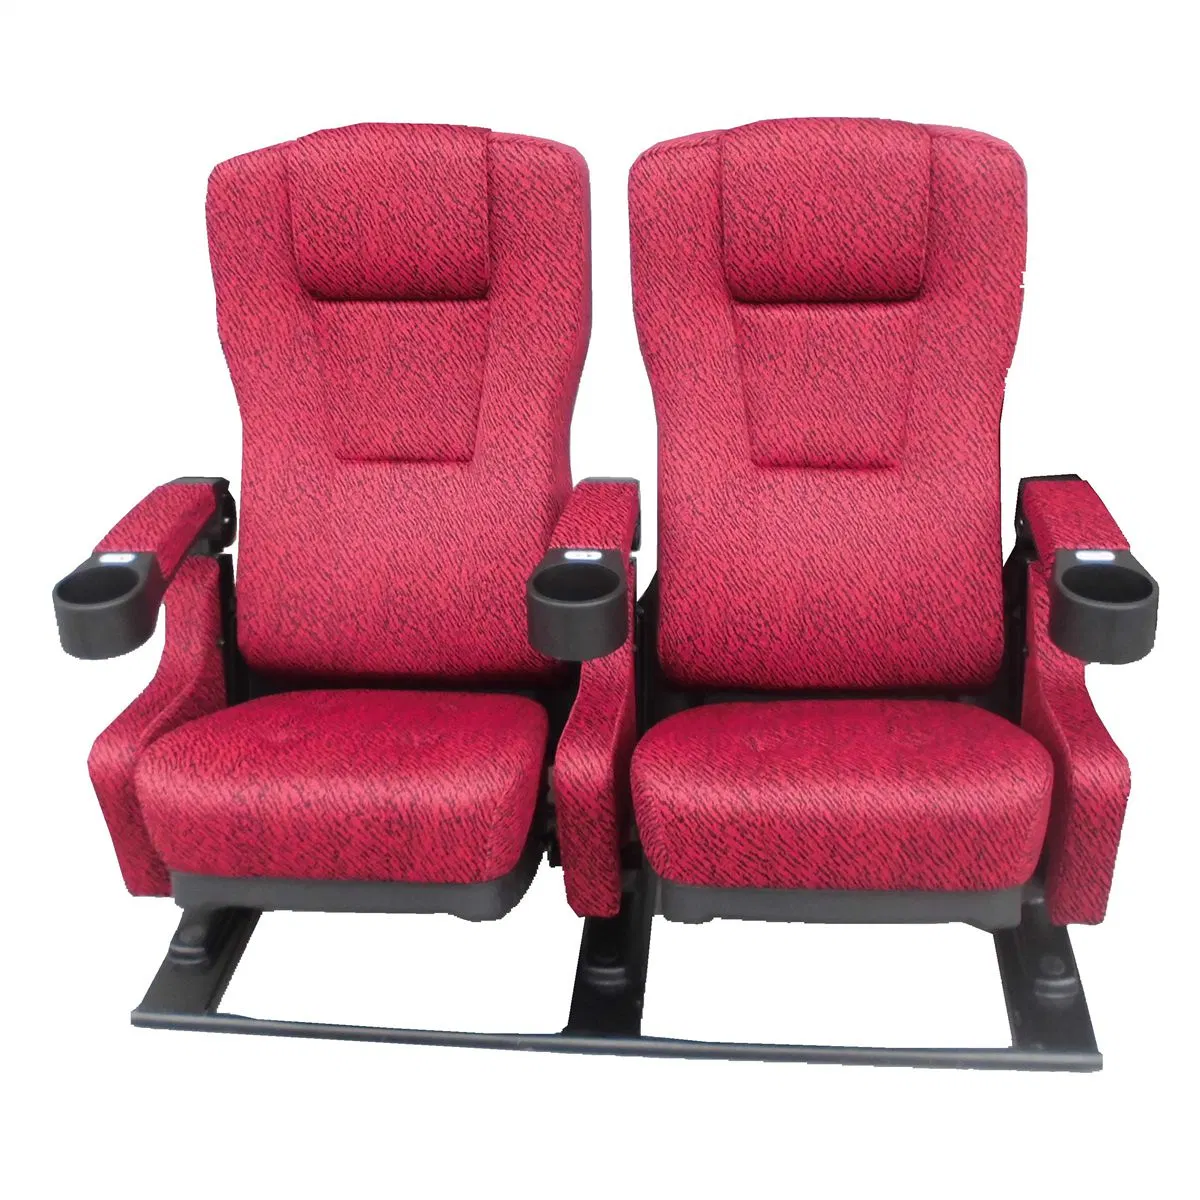 Cinema Chair Waiting Concert Church Lecture Stadium Meeting Conference School University College Auditorium Hall Seating Rocking VIP Film Movie Theater Seat